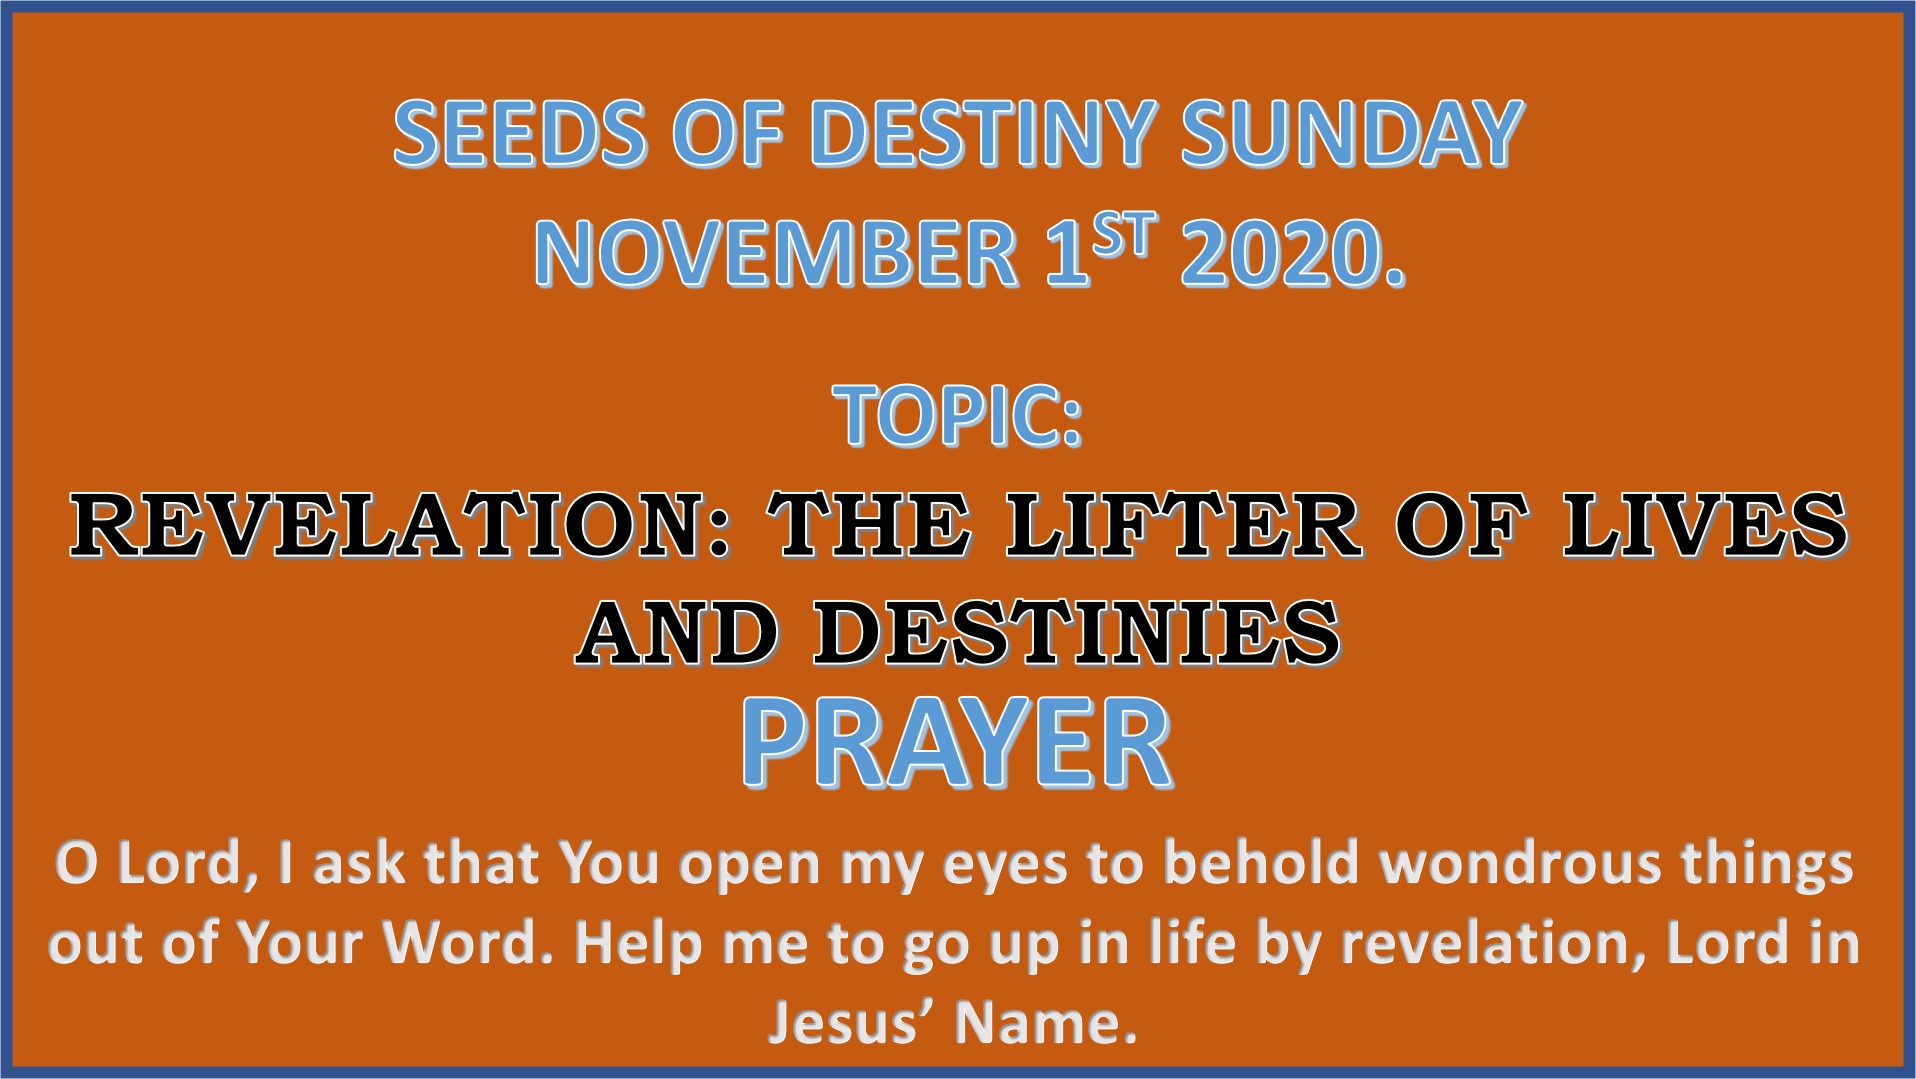 Seeds of Destiny Sunday 1st November 2020 by Dr Paul Enenche